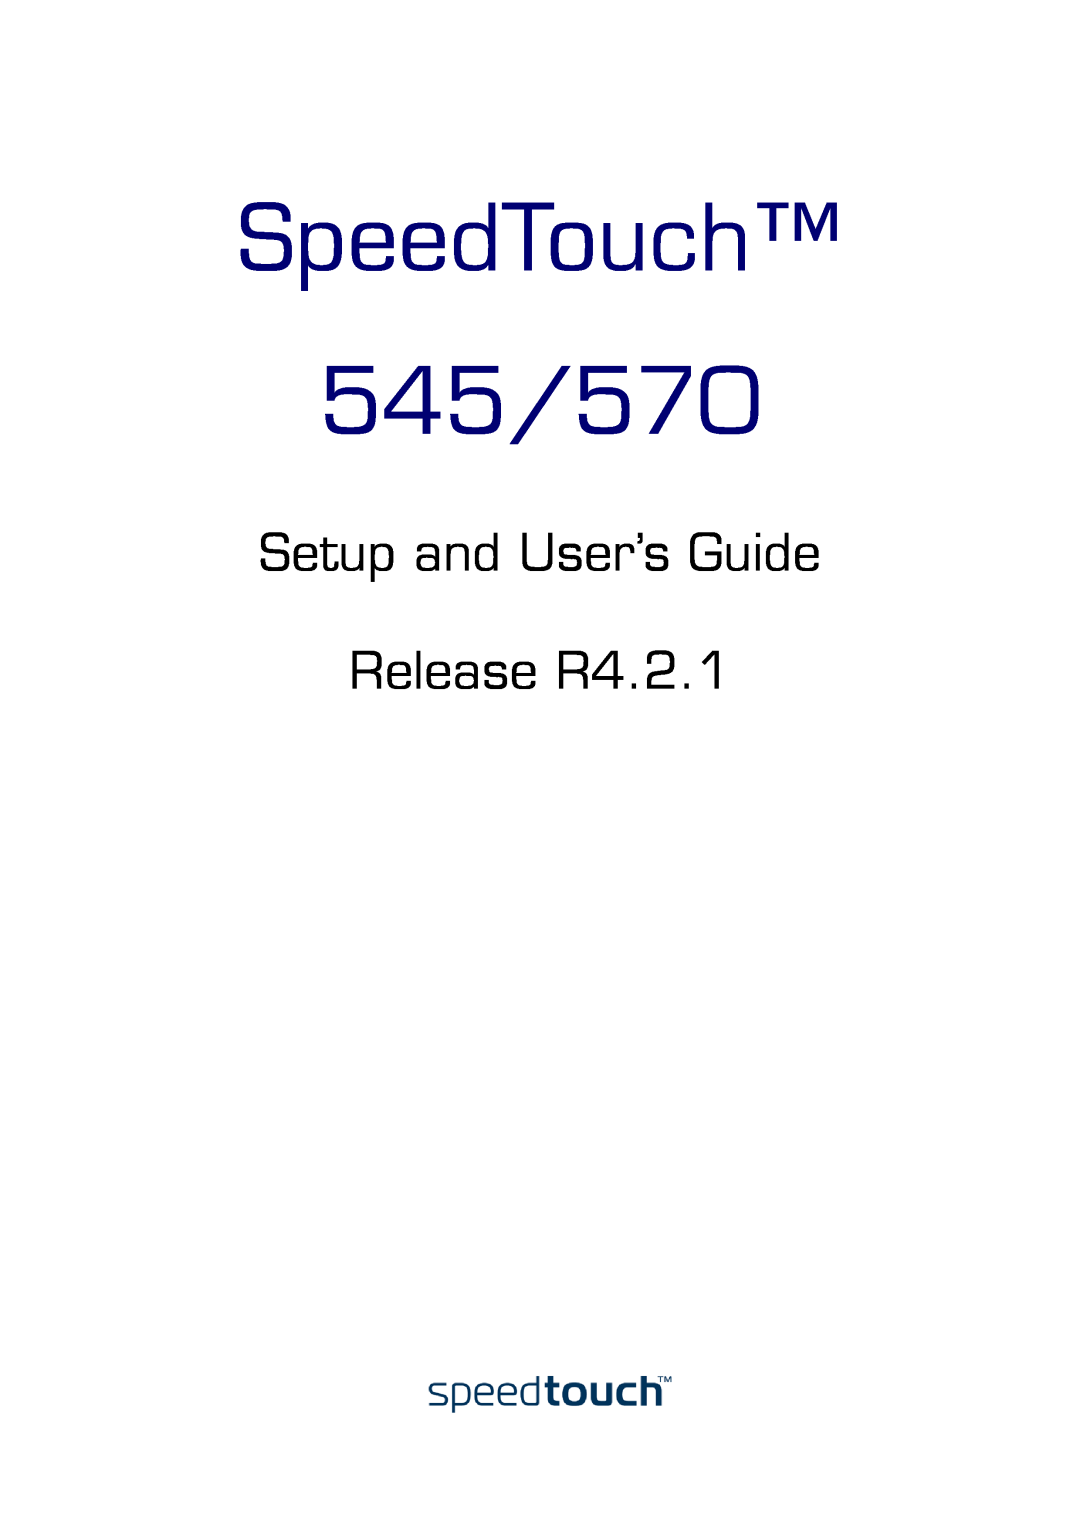 Technicolor - Thomson 545/570 manual SpeedTouch, Setup and User’s Guide Release R4.2.1 